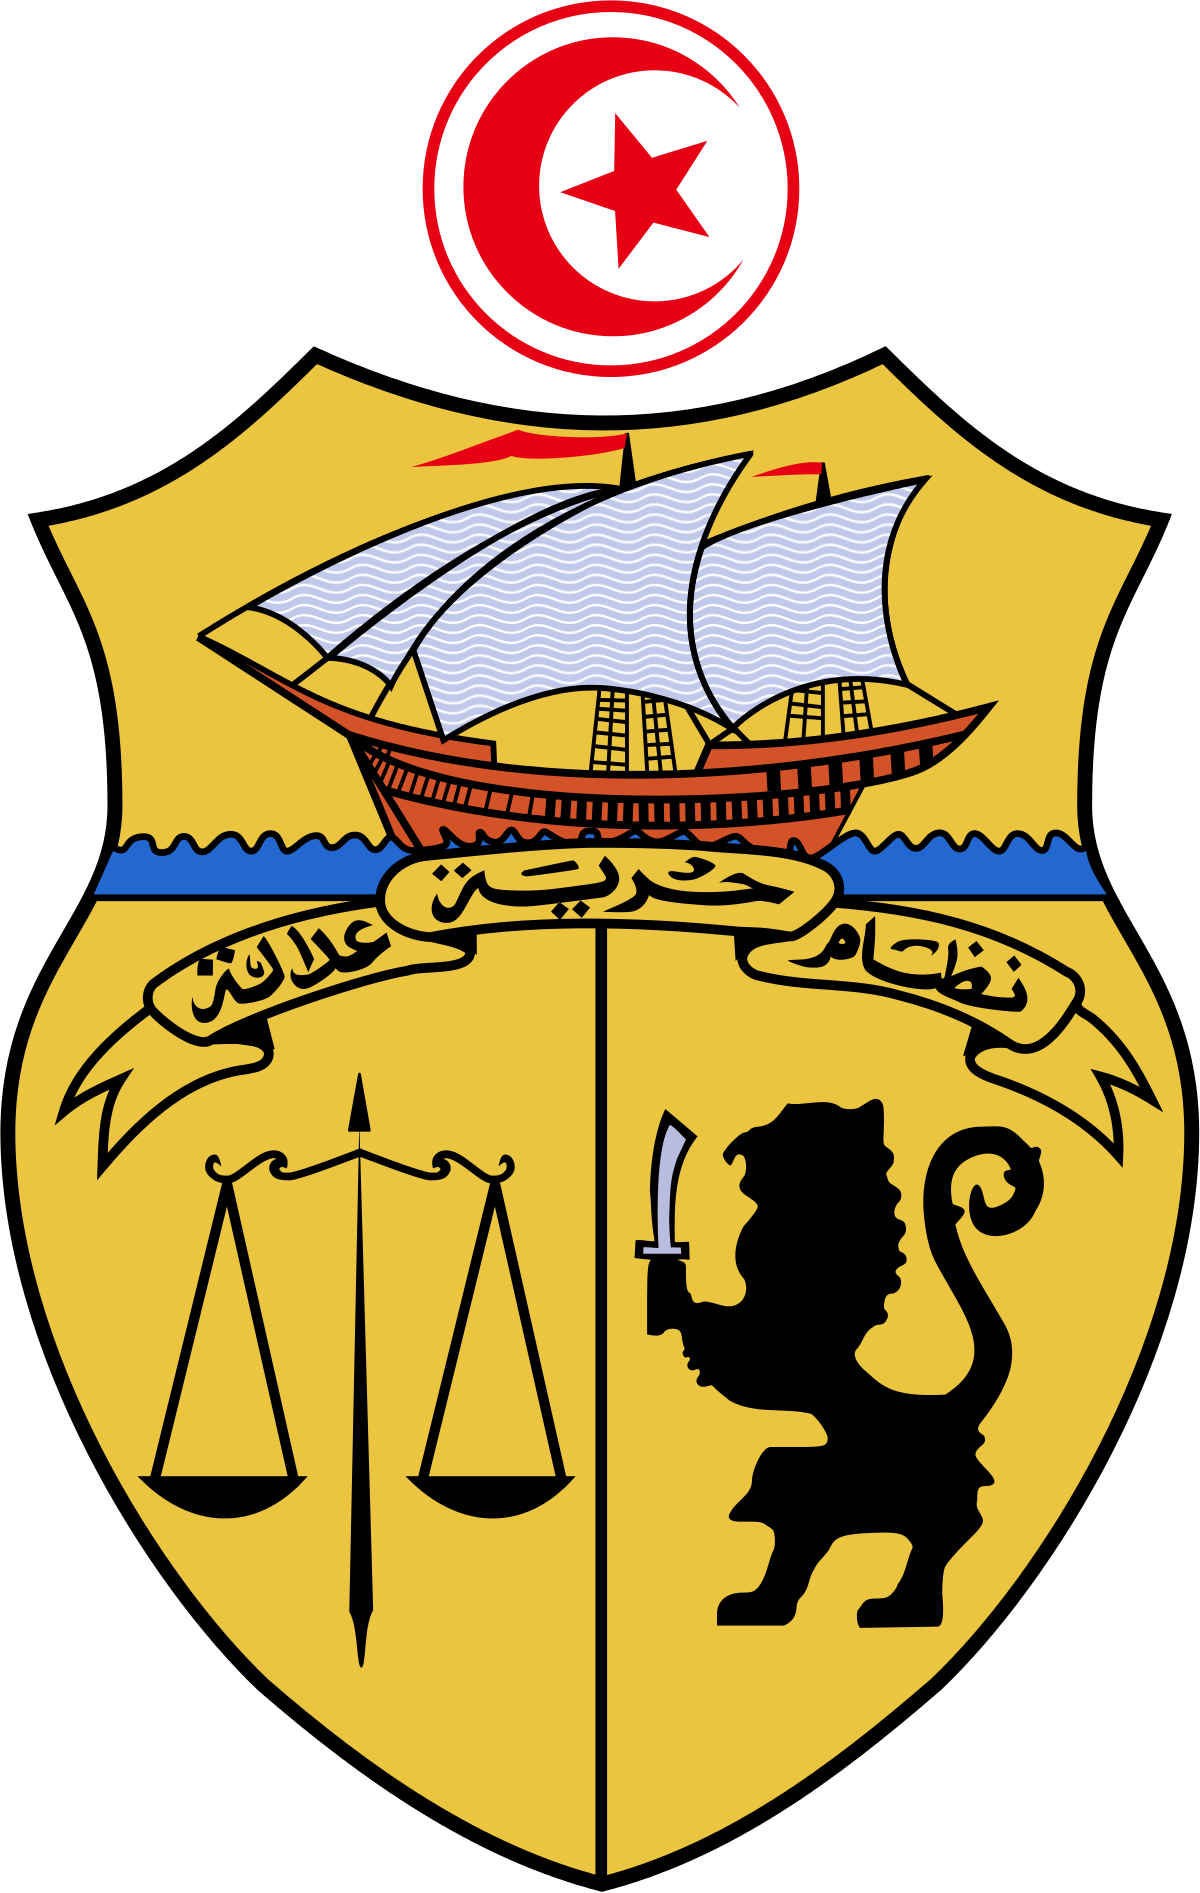 Slavery clipart early agriculture. Coat of arms tunisia